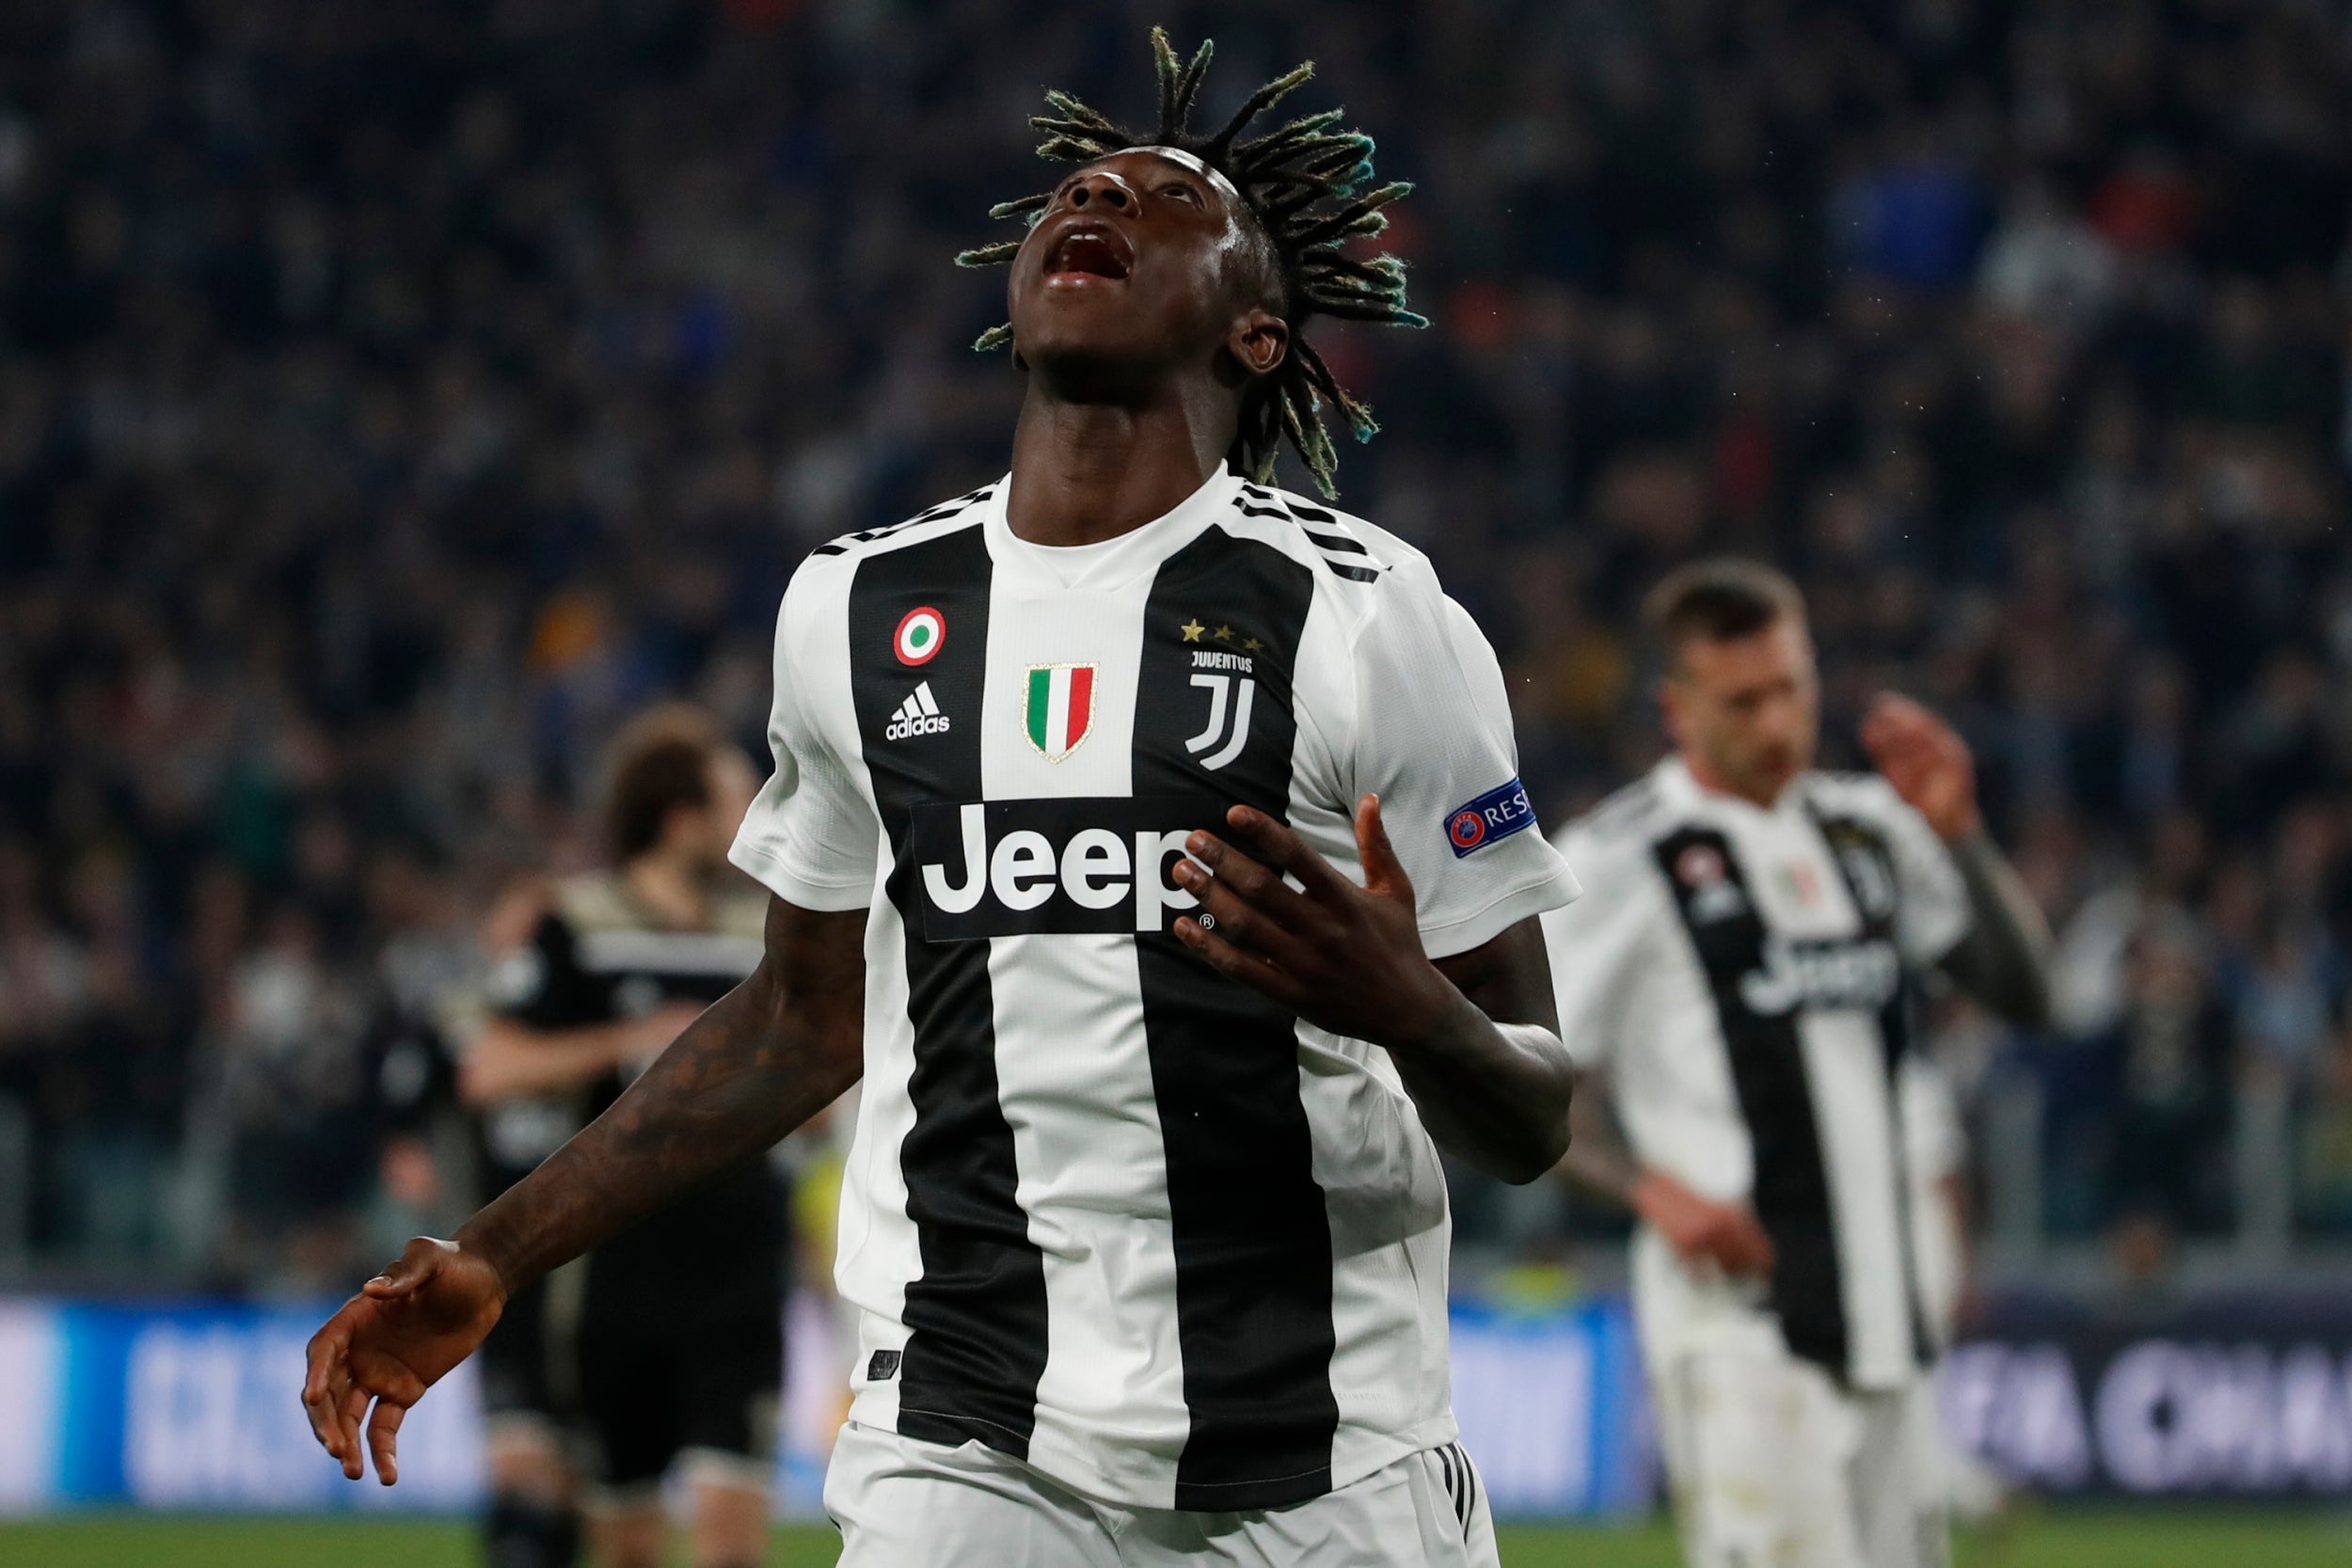 Everton are set to sign Moise Kean